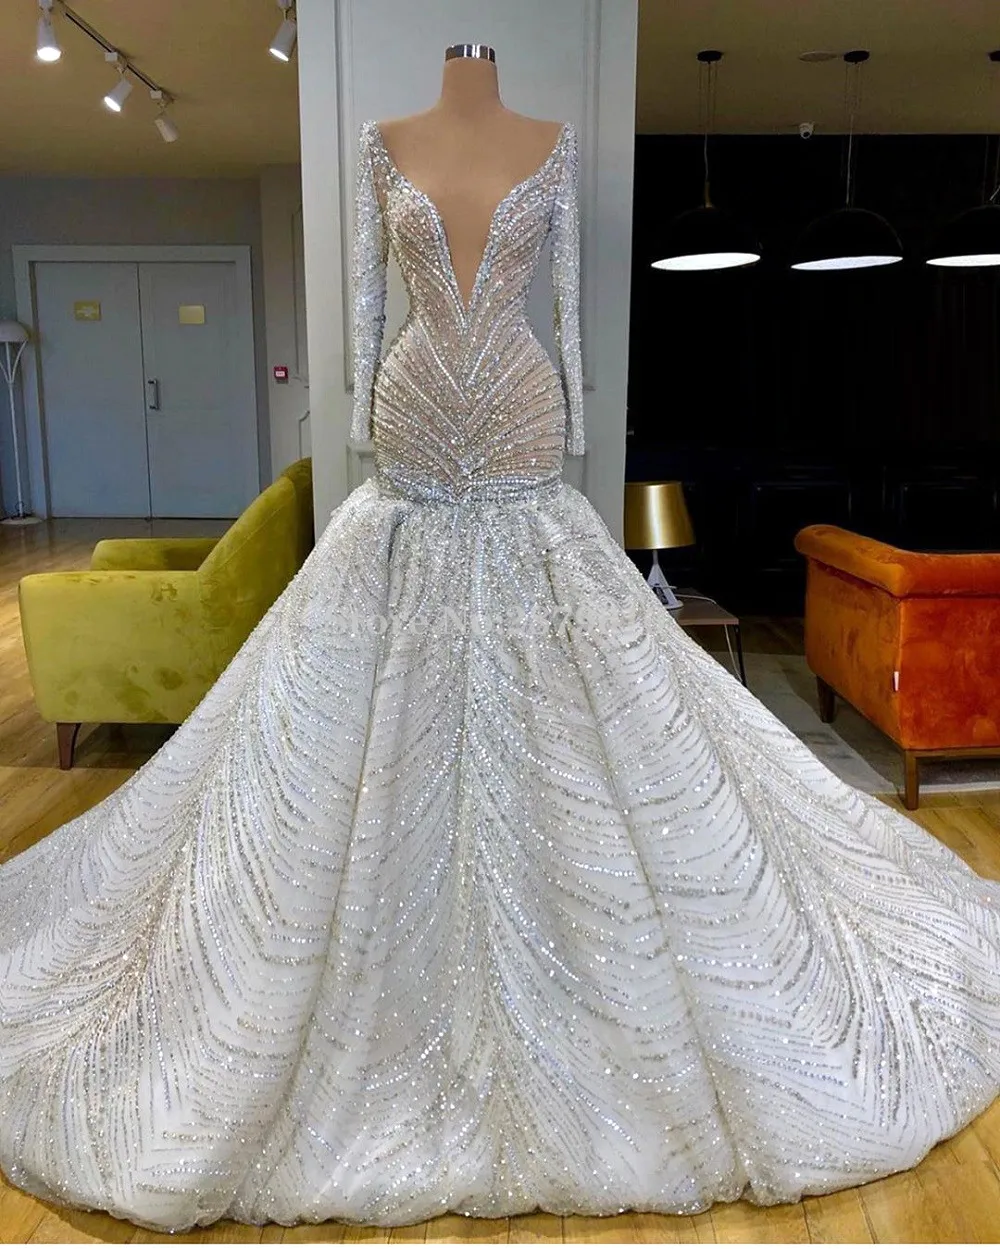 

Sparkly Ivory Mermaid Evening Dresses Long Sleeves Sequins Floor-Length Prom Dress Robe De Soiree Aibye Middle East Formal Dubai